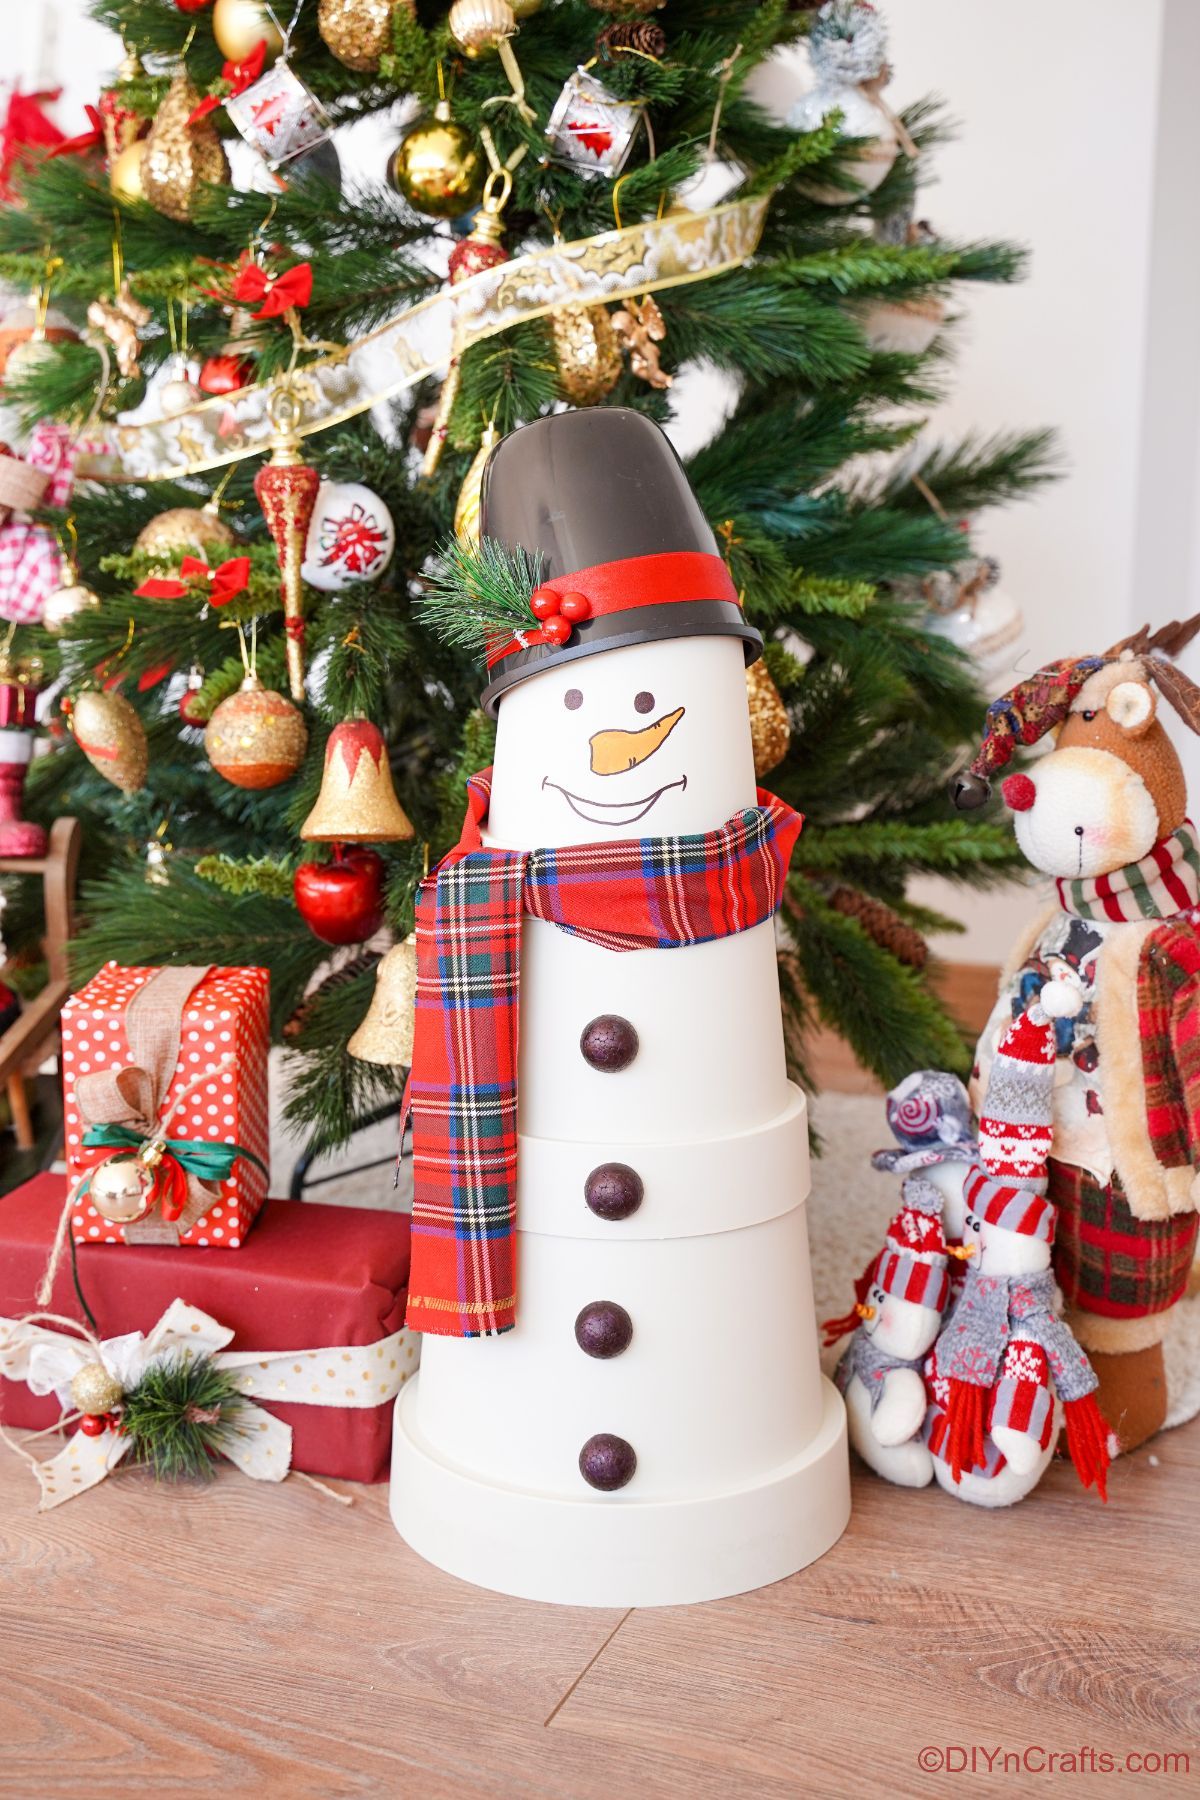 fake flower pot snowman in front of Christmas tree with presents